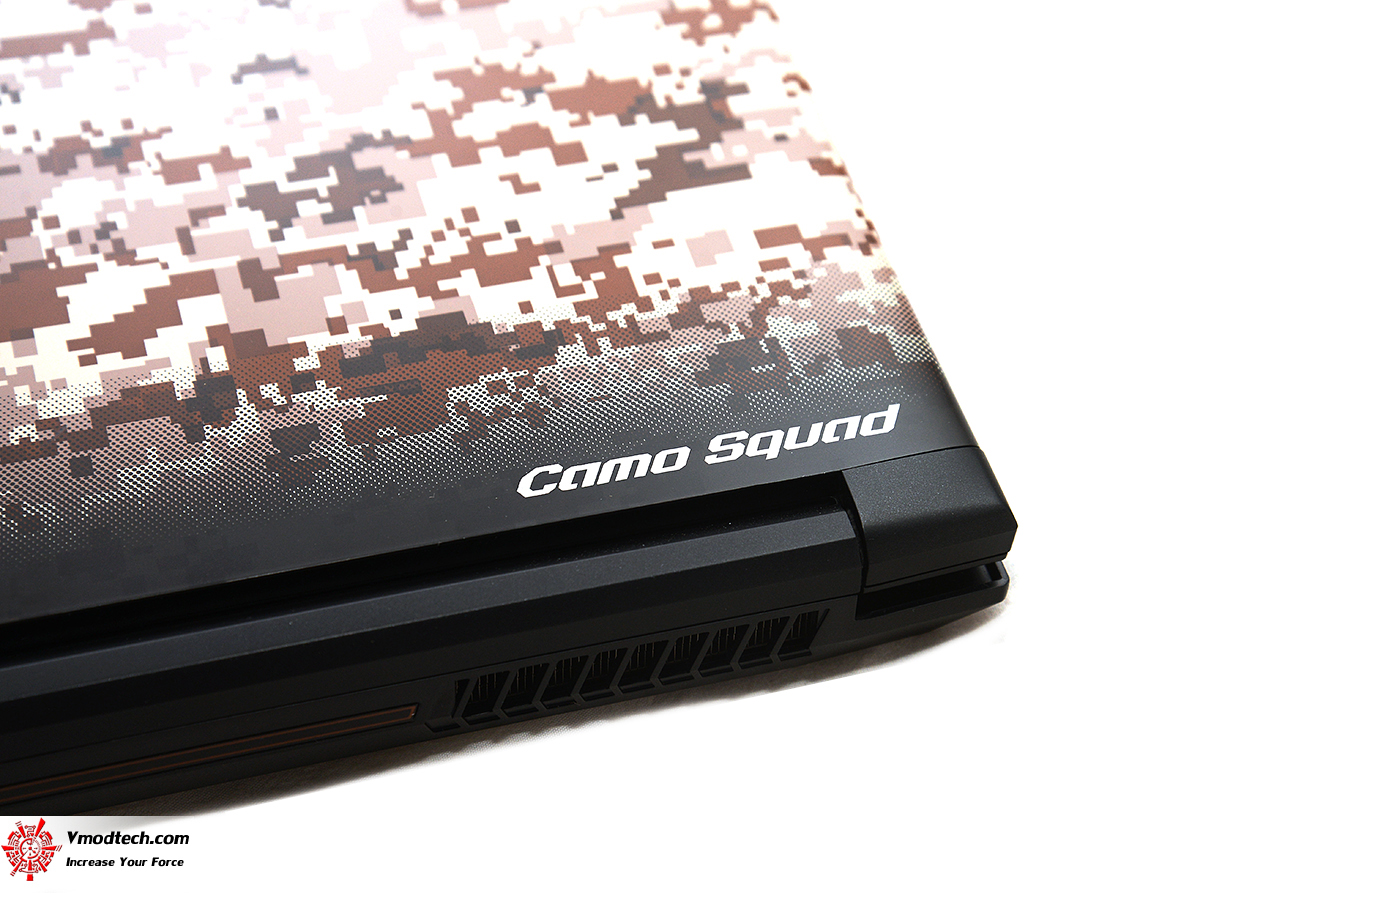 dsc 10691 MSI GE62 7RE Camo Squad Limited Edition Review